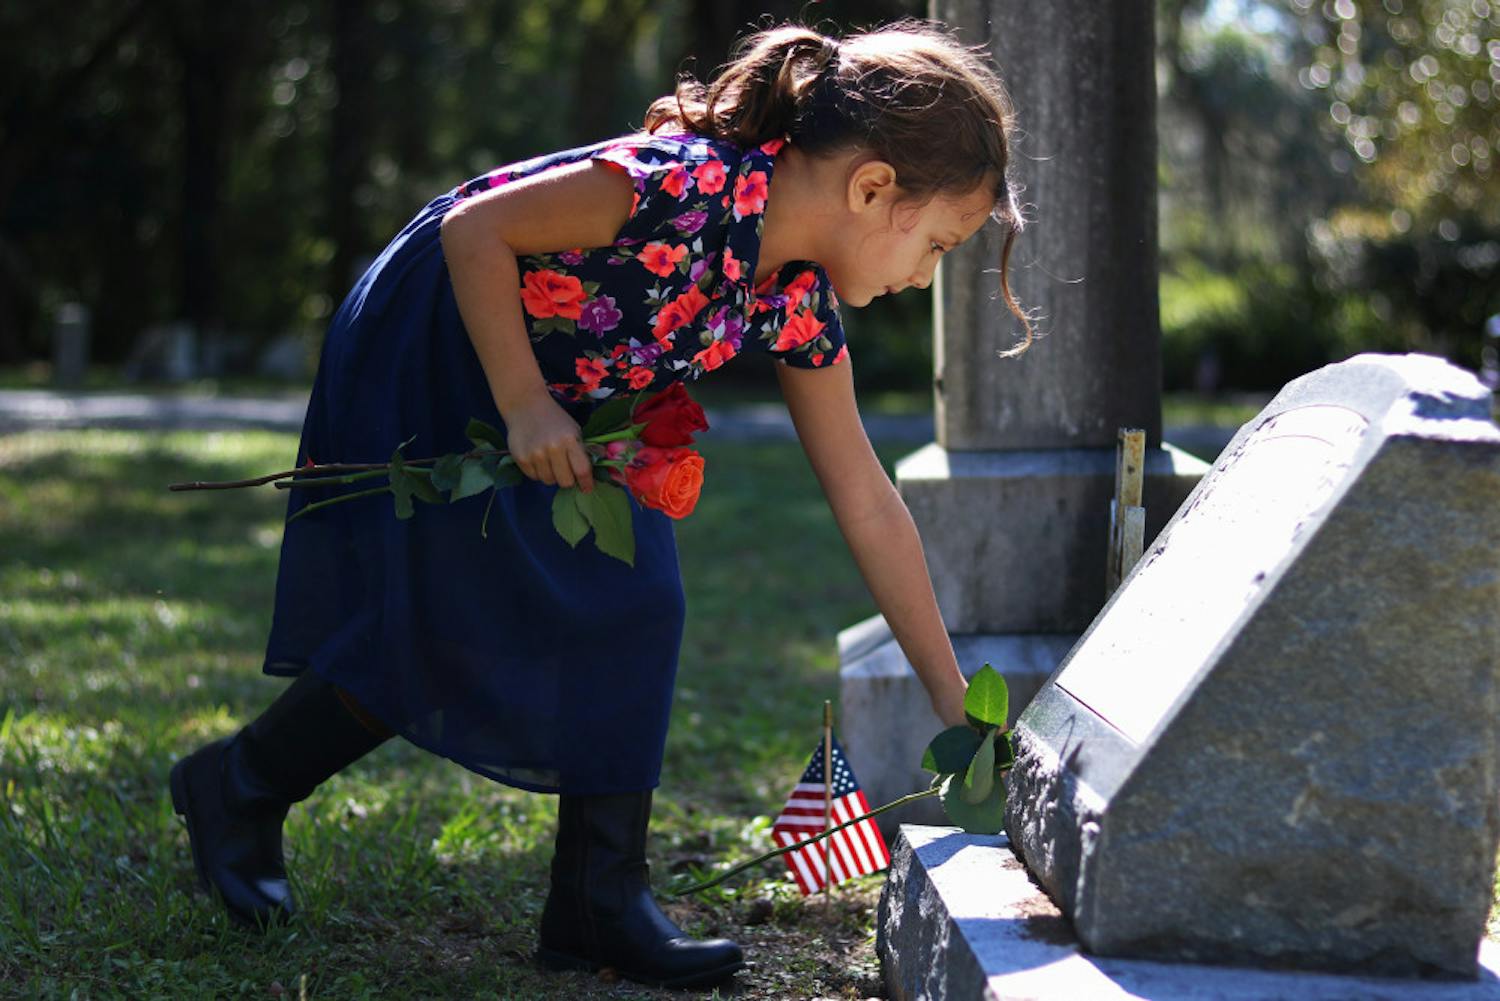 Svetlana Scalise, 6, places a flower on the grave of a veteran Monday in Evergreen Cemetery. Her father said she had the day off and wanted to spend it giving flowers to veterans.